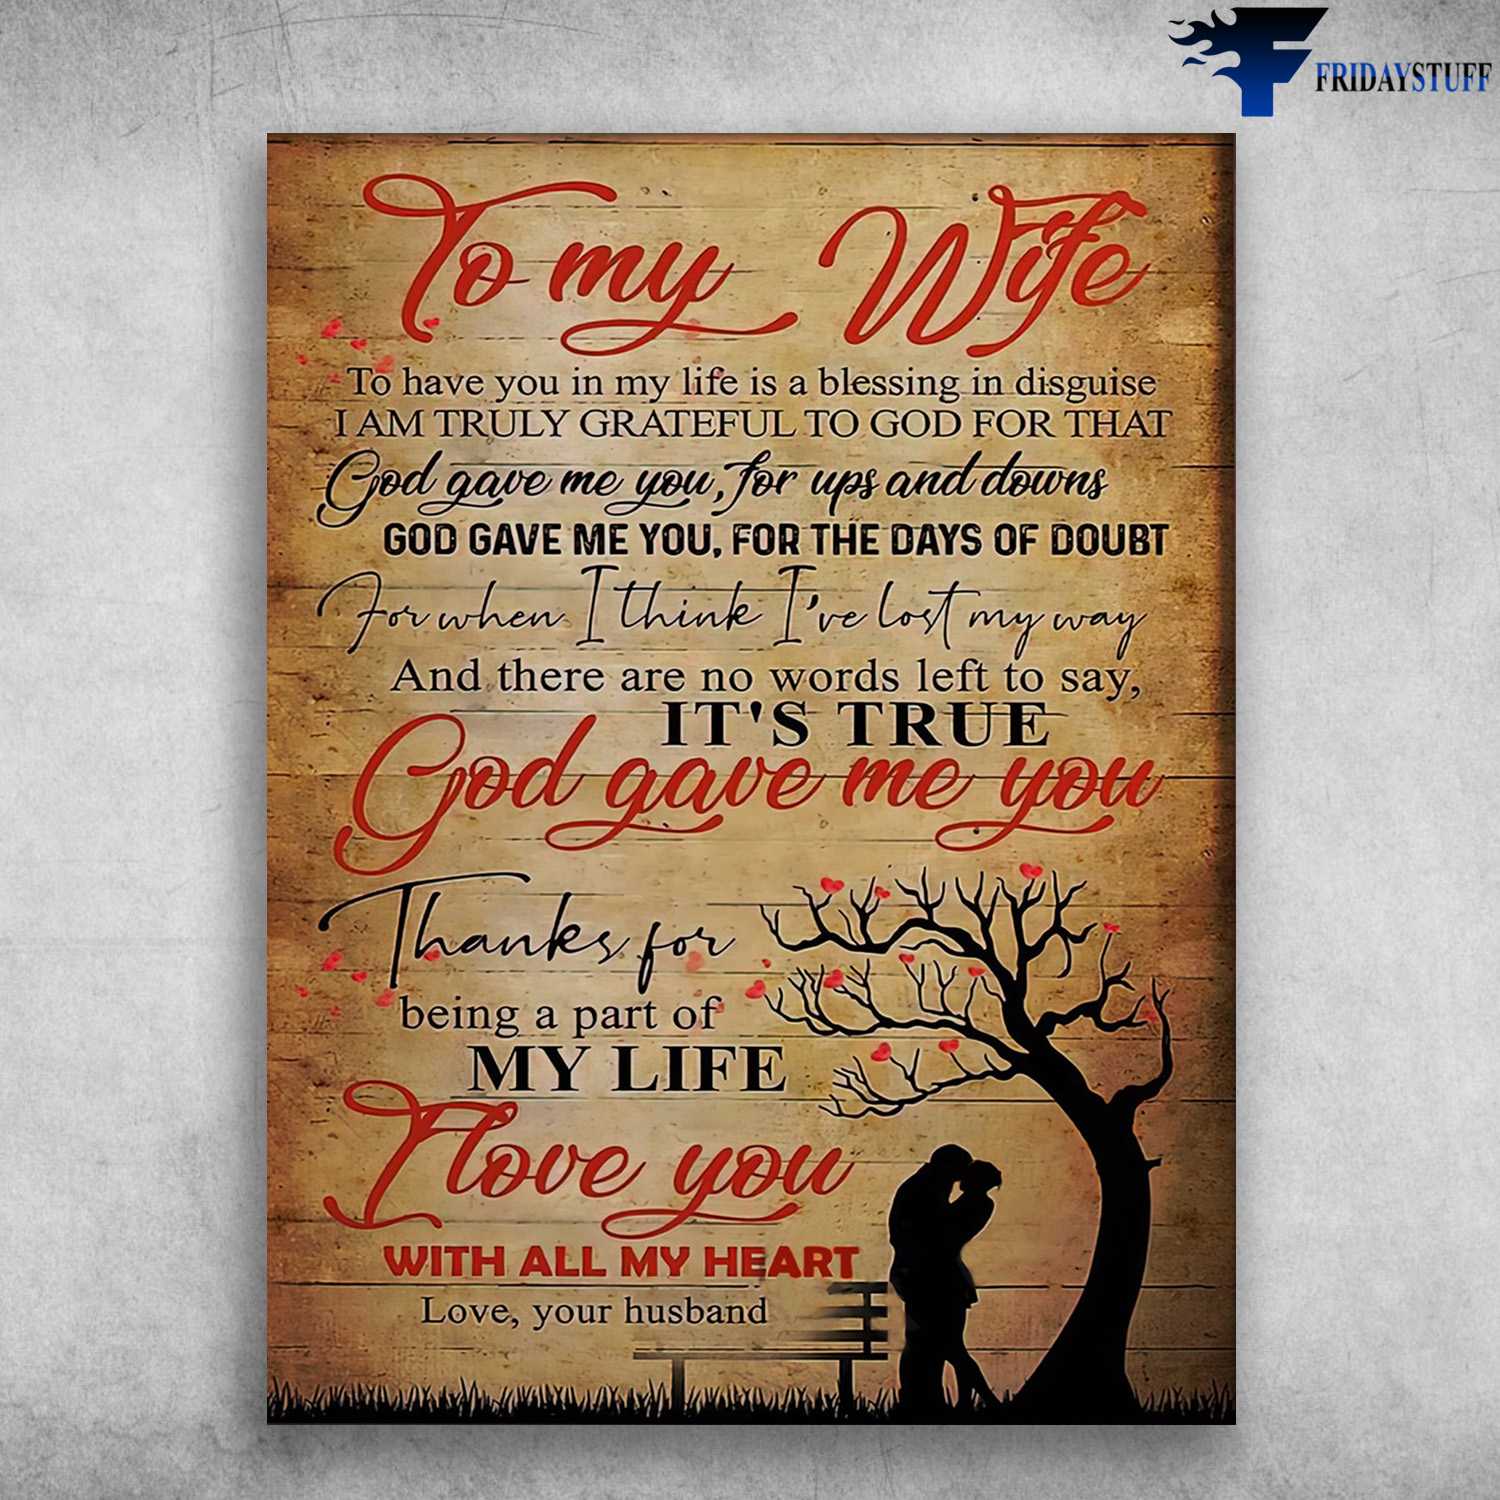 Love Couple, Gift For Wife - To My Wife, To Have You In My Life, Is A Blessing In Disguise, I Am Truly Grateful To God For That, God Gave Me You, For Ups And Downs